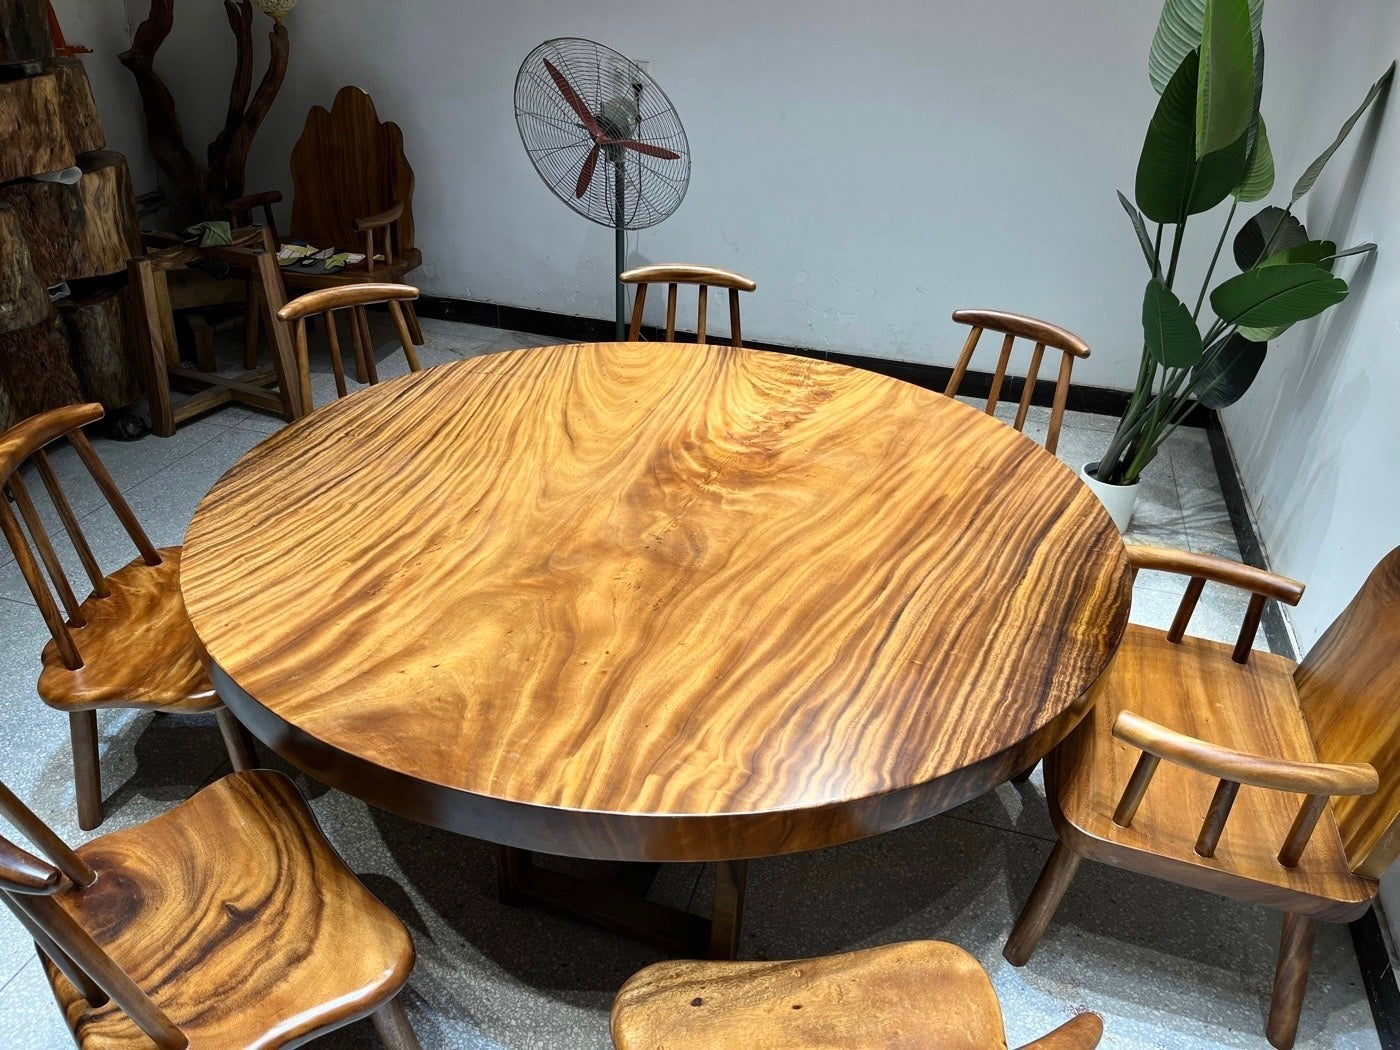 71" large wood round table, solid wood round table, wood round table base, large wood round table